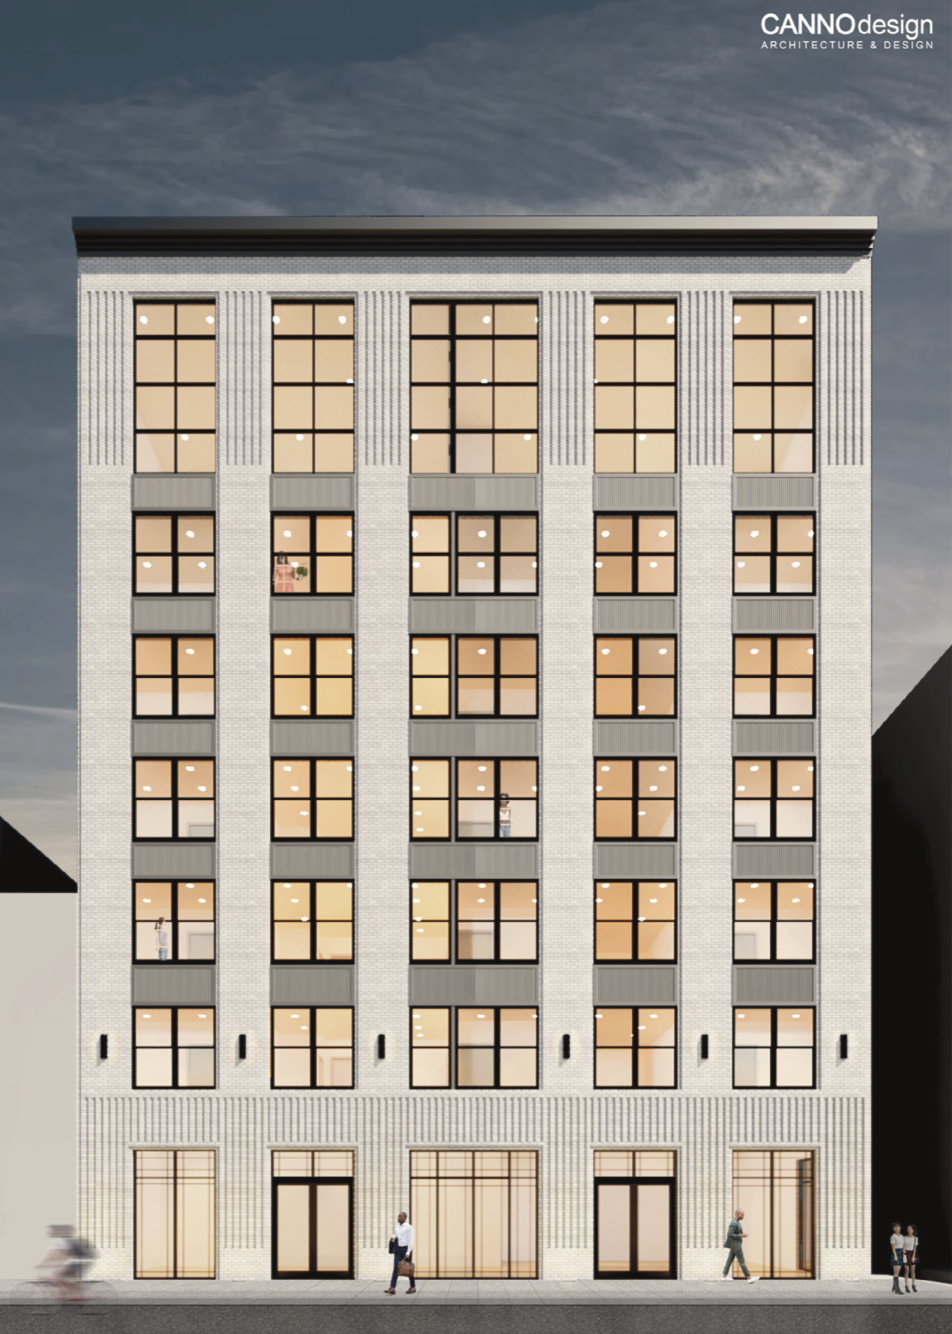 Rendering of 36-38 South 2nd Street. Credit: CANNOdesign